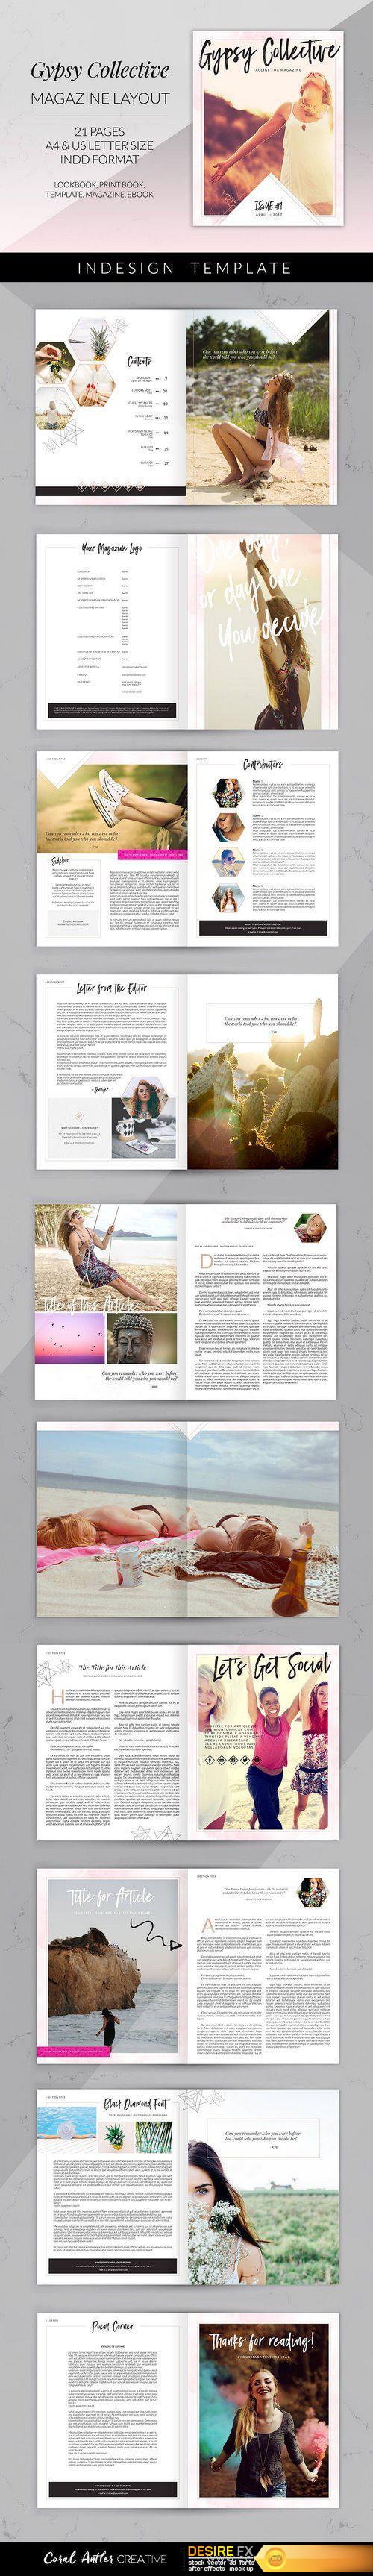 CM - Gypsy Collective Magazine Layout 1457575